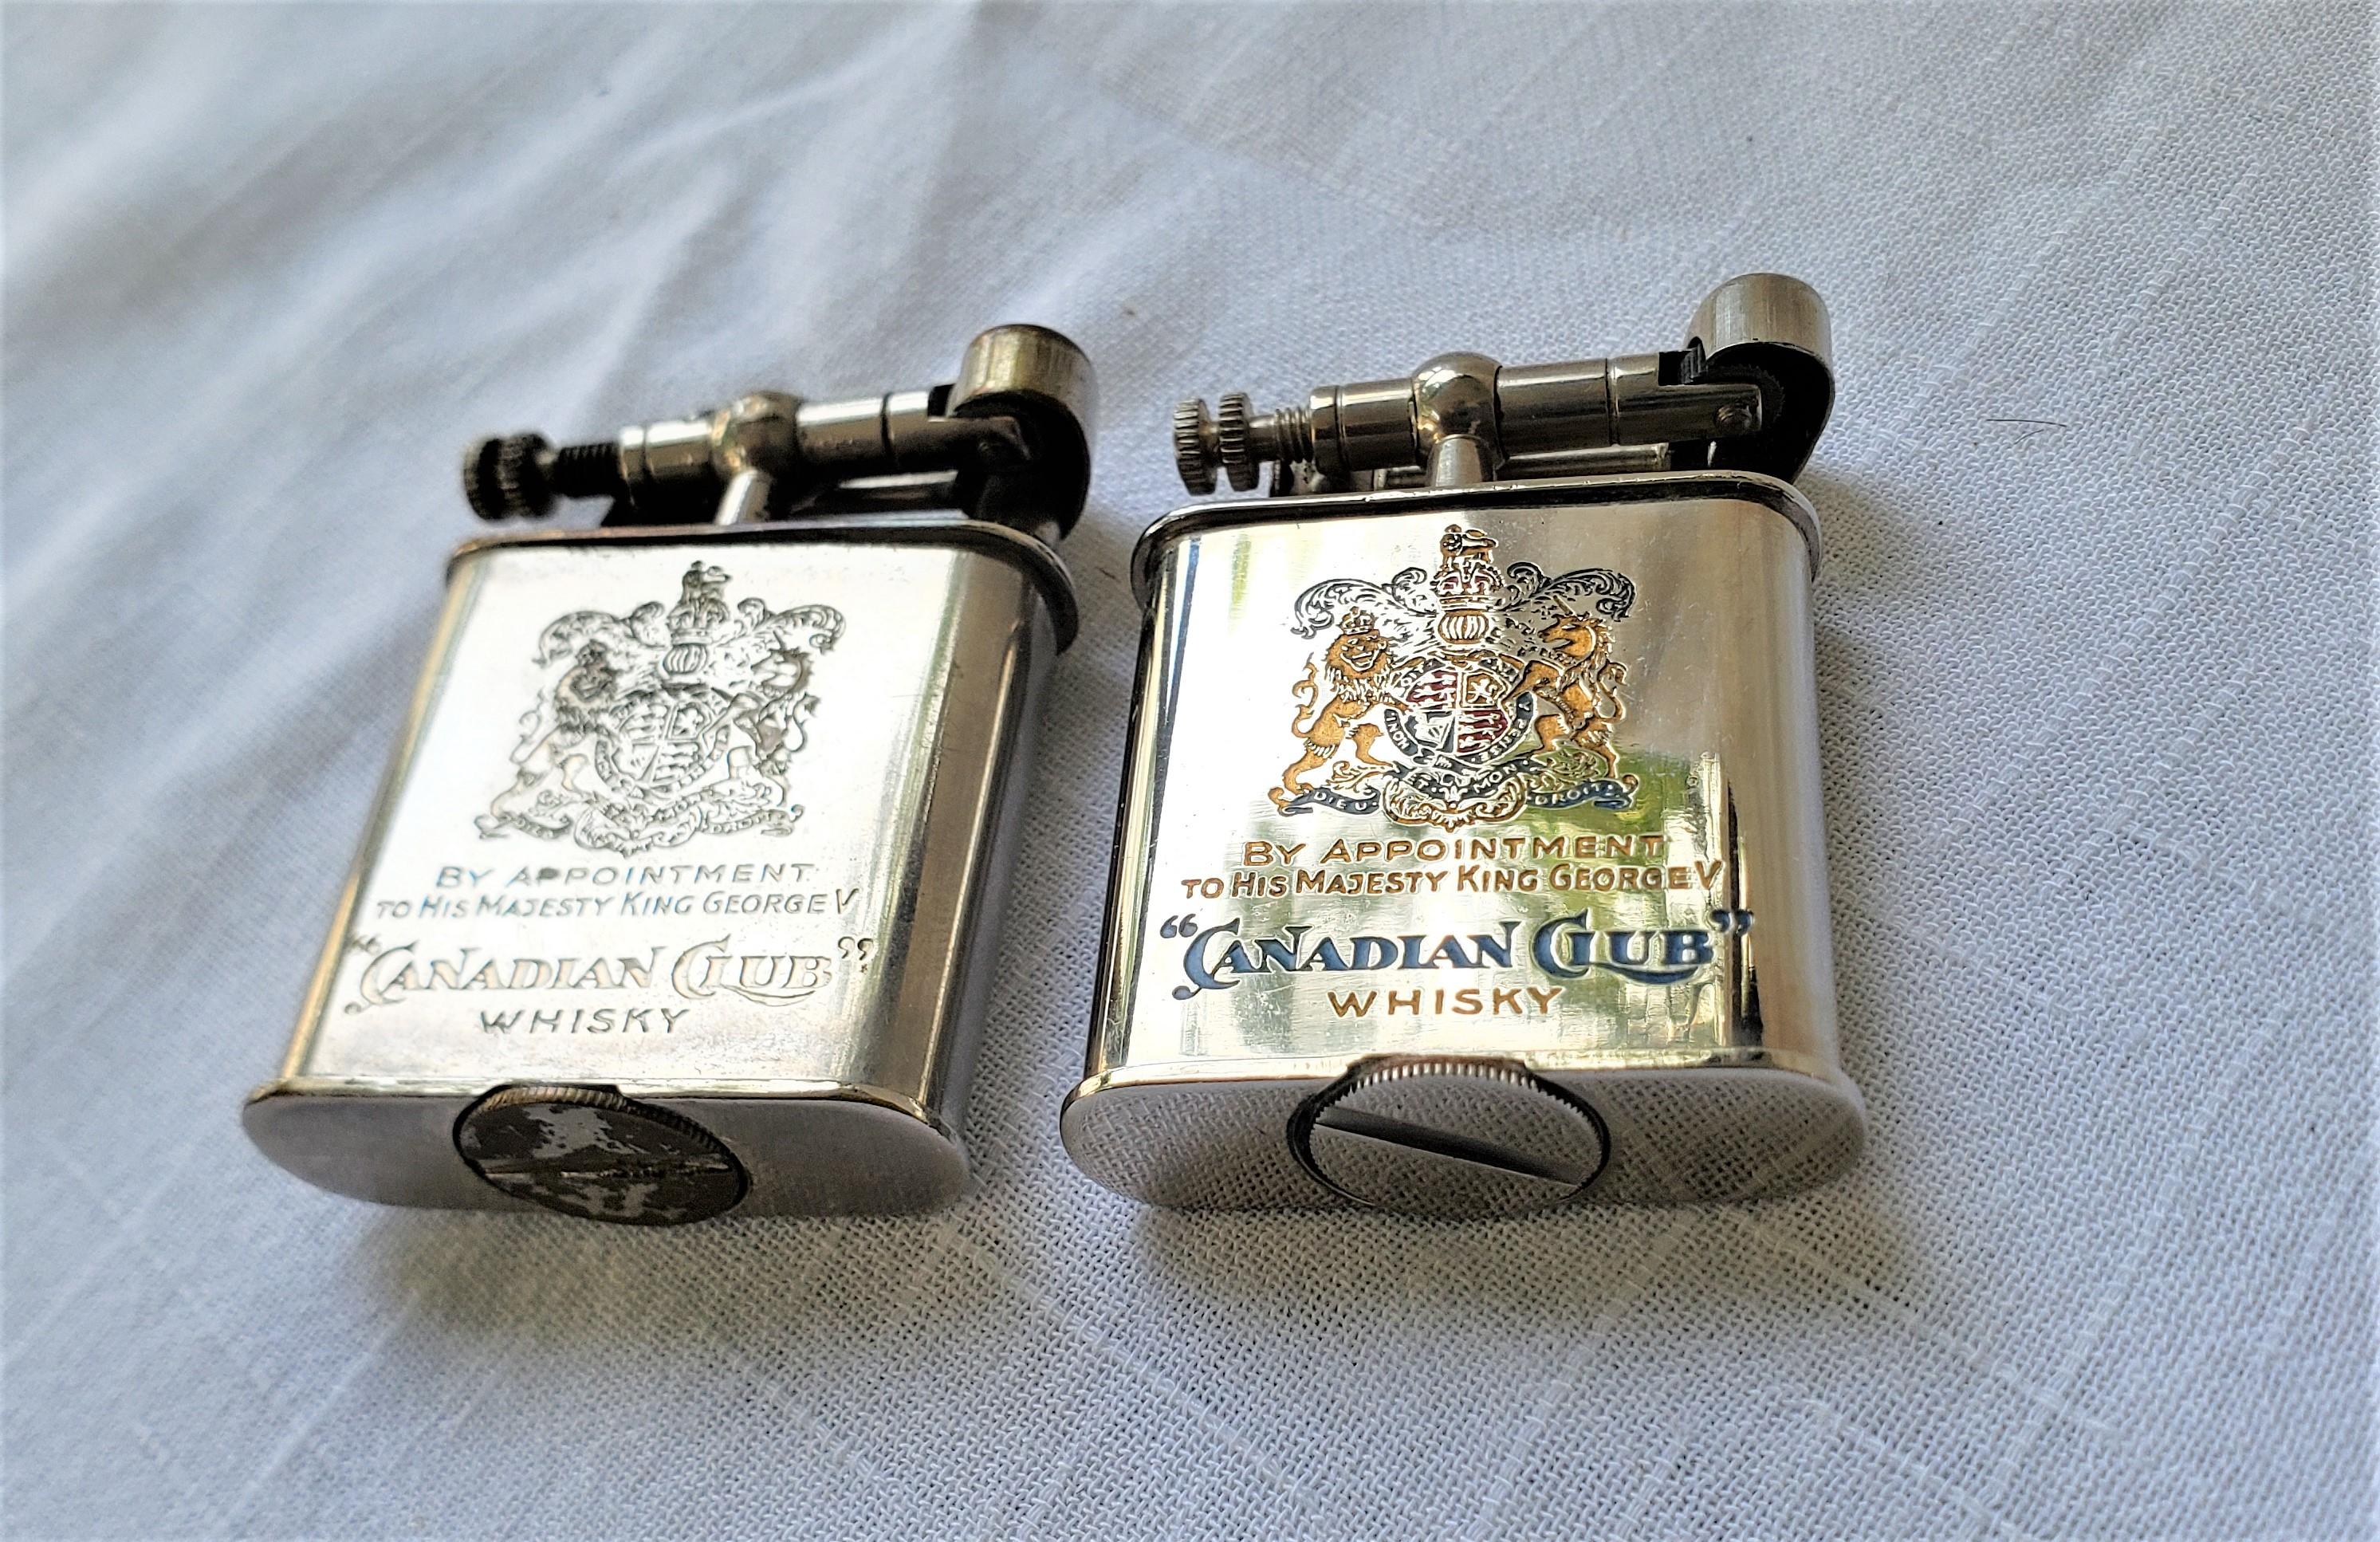 This pair of antique pocket lighters show no maker's signature, but originated from Germany and date to approximately 1920 and done in the period Art Deco style. The lighters are done with a chromed metal and have an egraved and cold-painted logo